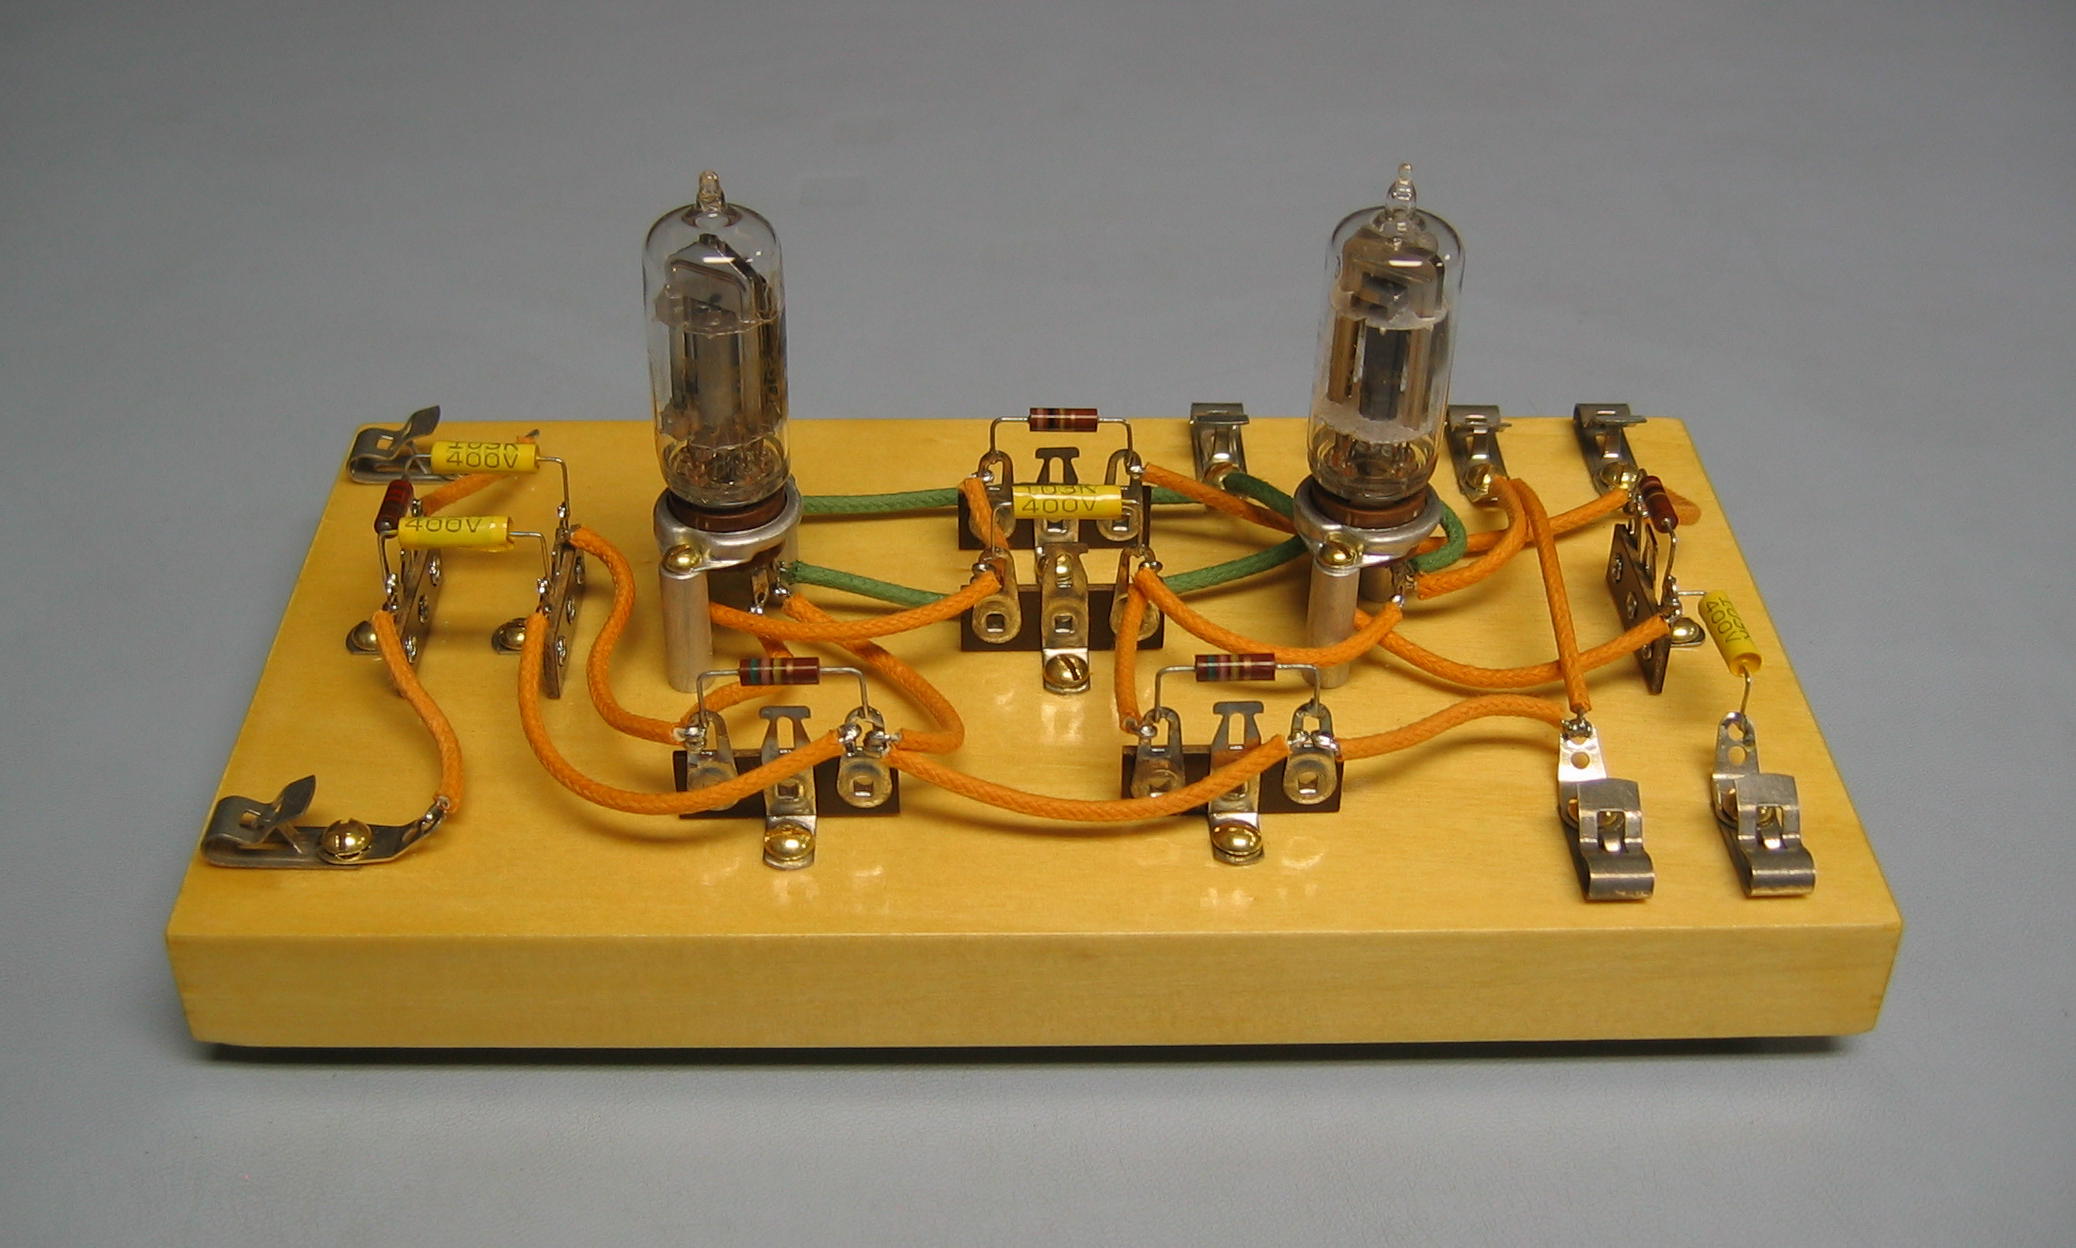 Morgan also presented this little two-tube amplifier! 